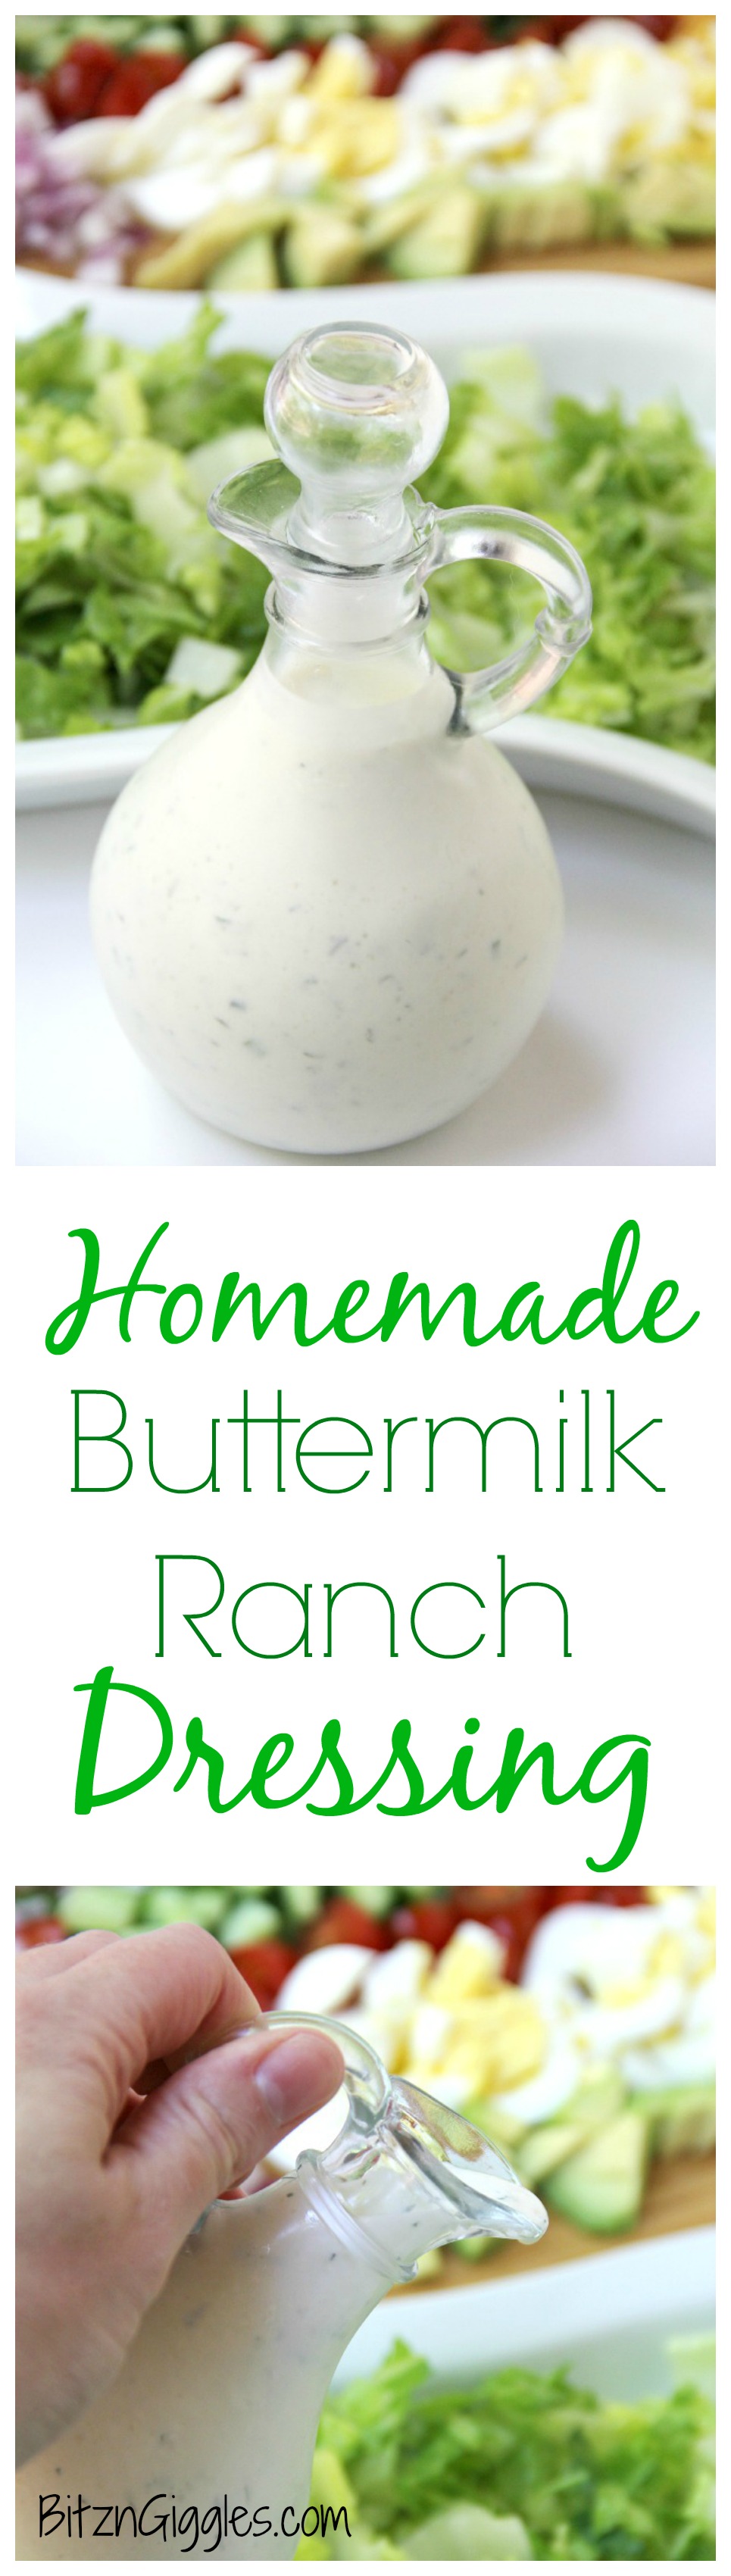 Homemade Buttermilk Ranch Dressing - A wonderful combination of herbs and spices brings this delicious buttermilk ranch dressing to life! Once you try this homemade ranch, you'll never go back to bottled!